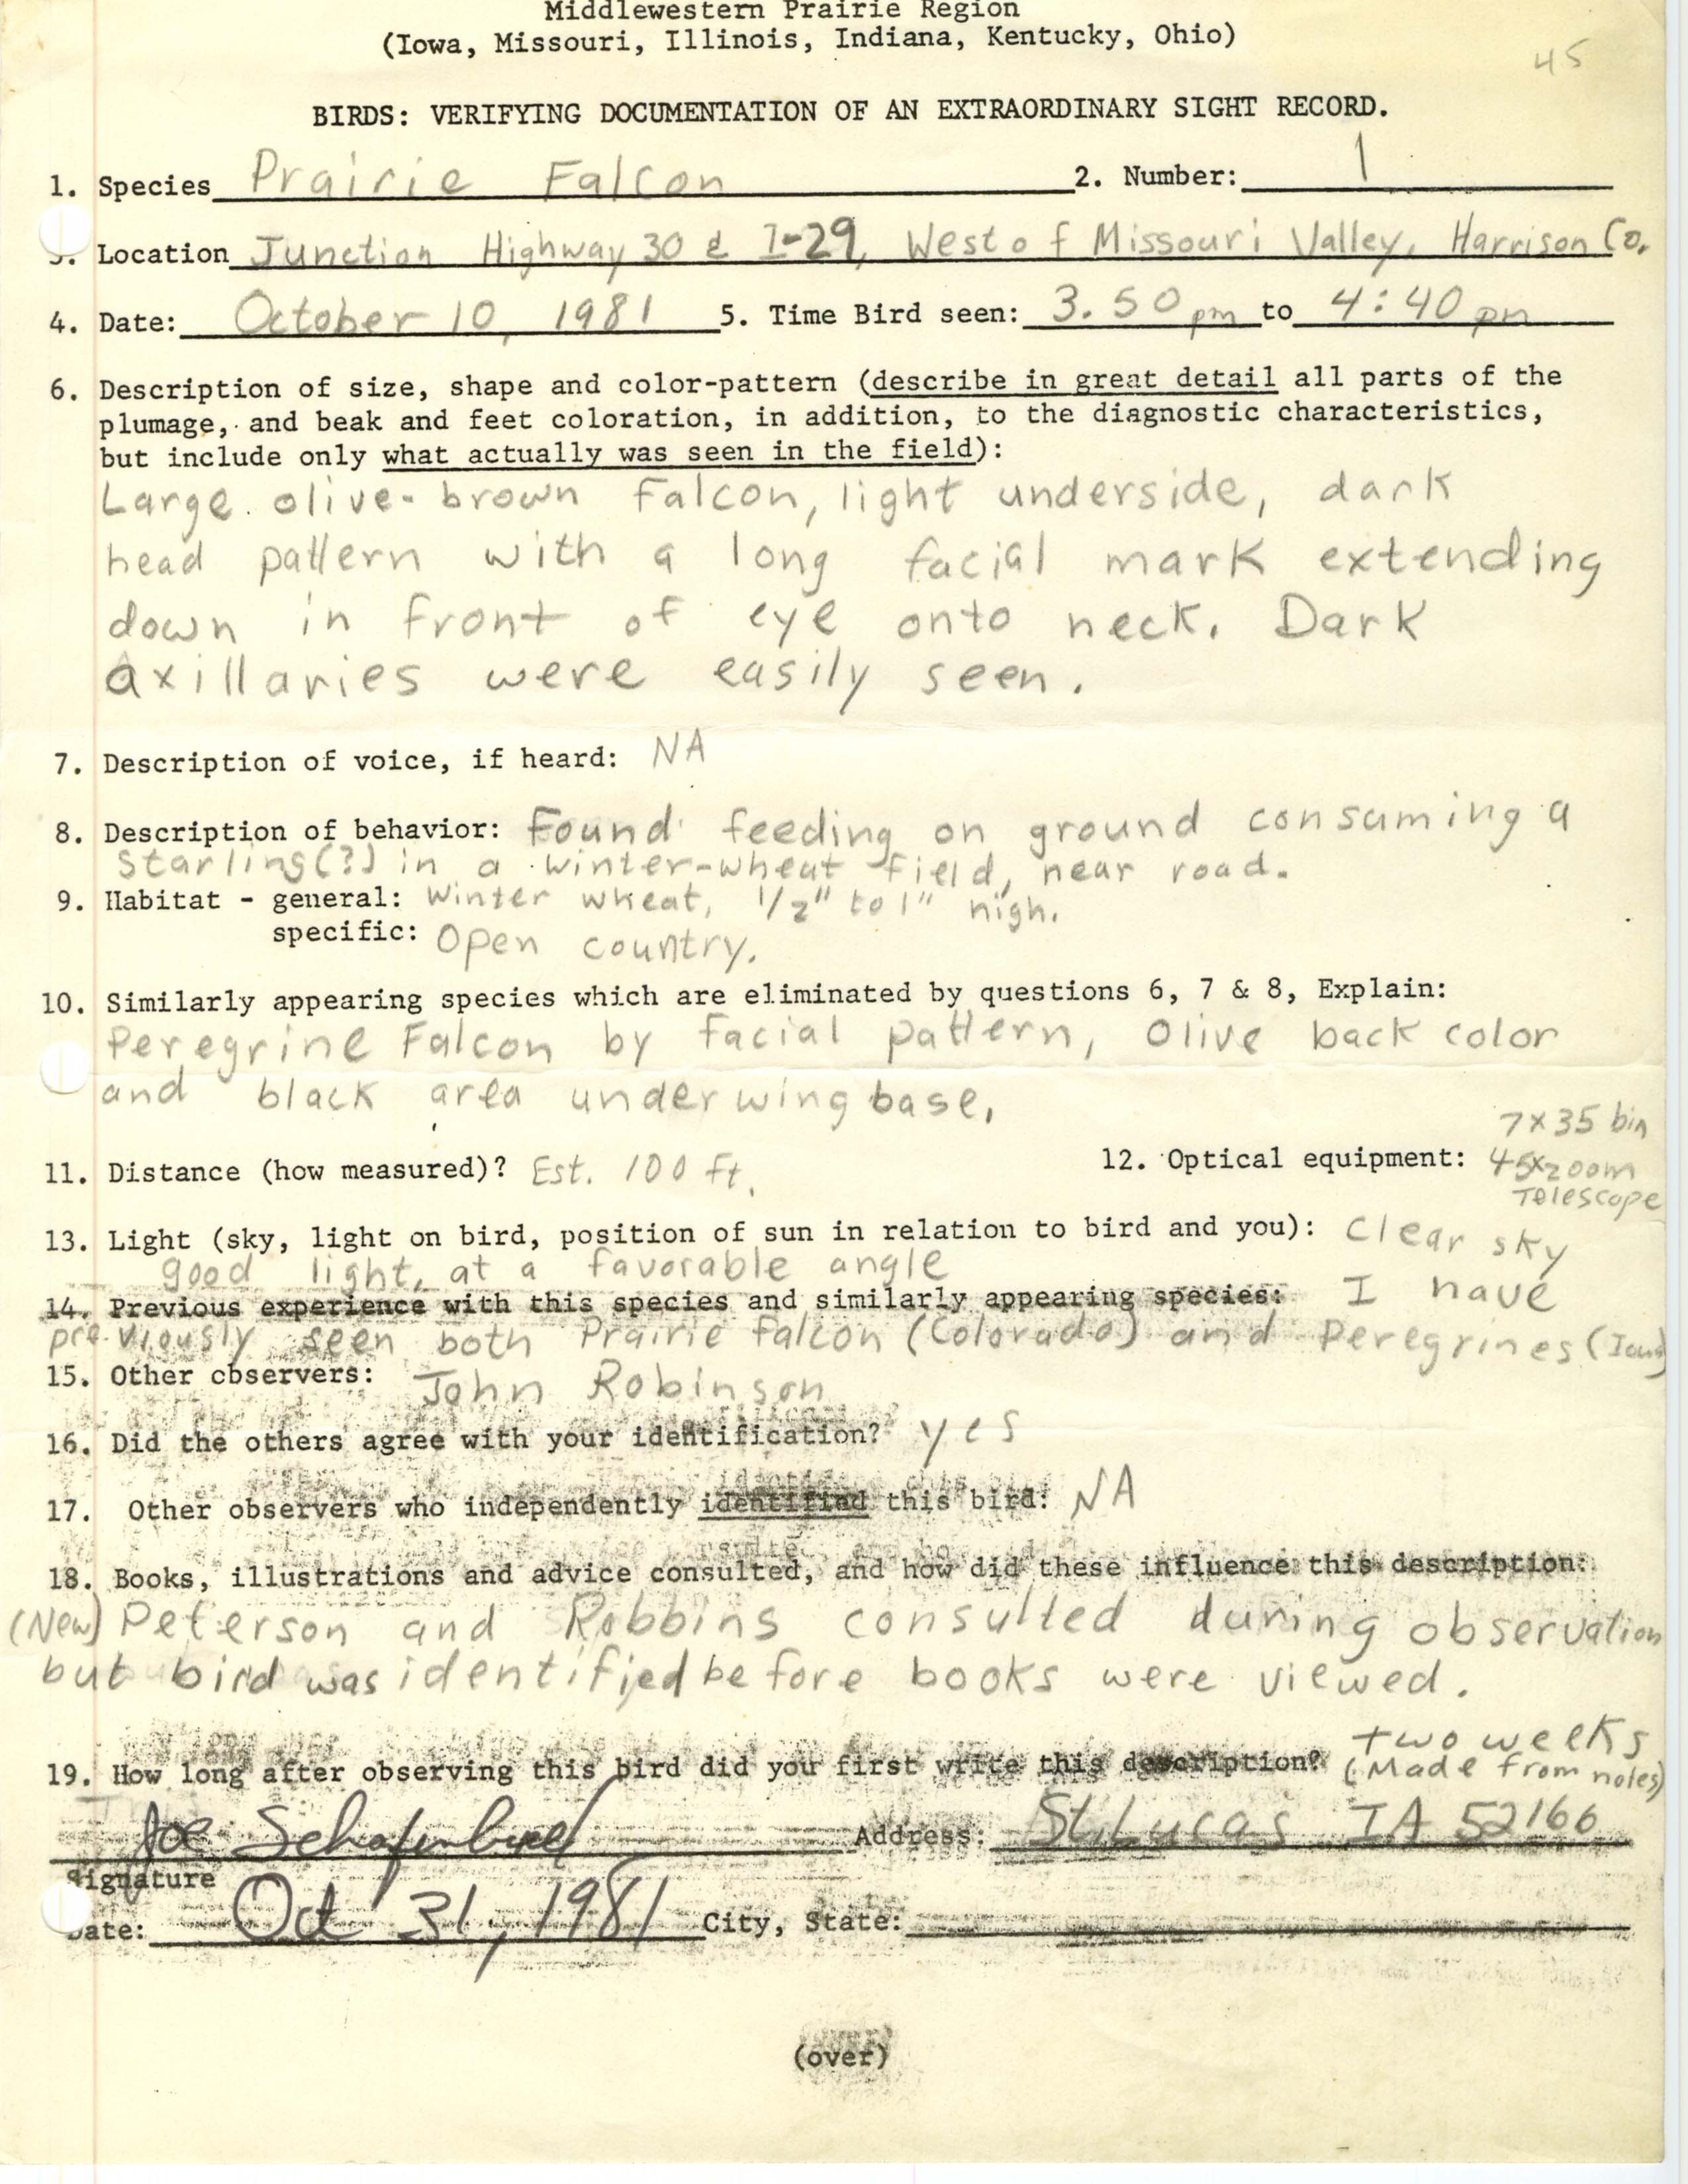 Rare bird documentation form for Prairie Falcon at the junction of Interstate 29 and U.S. 30 west of Missouri Valley in 1981